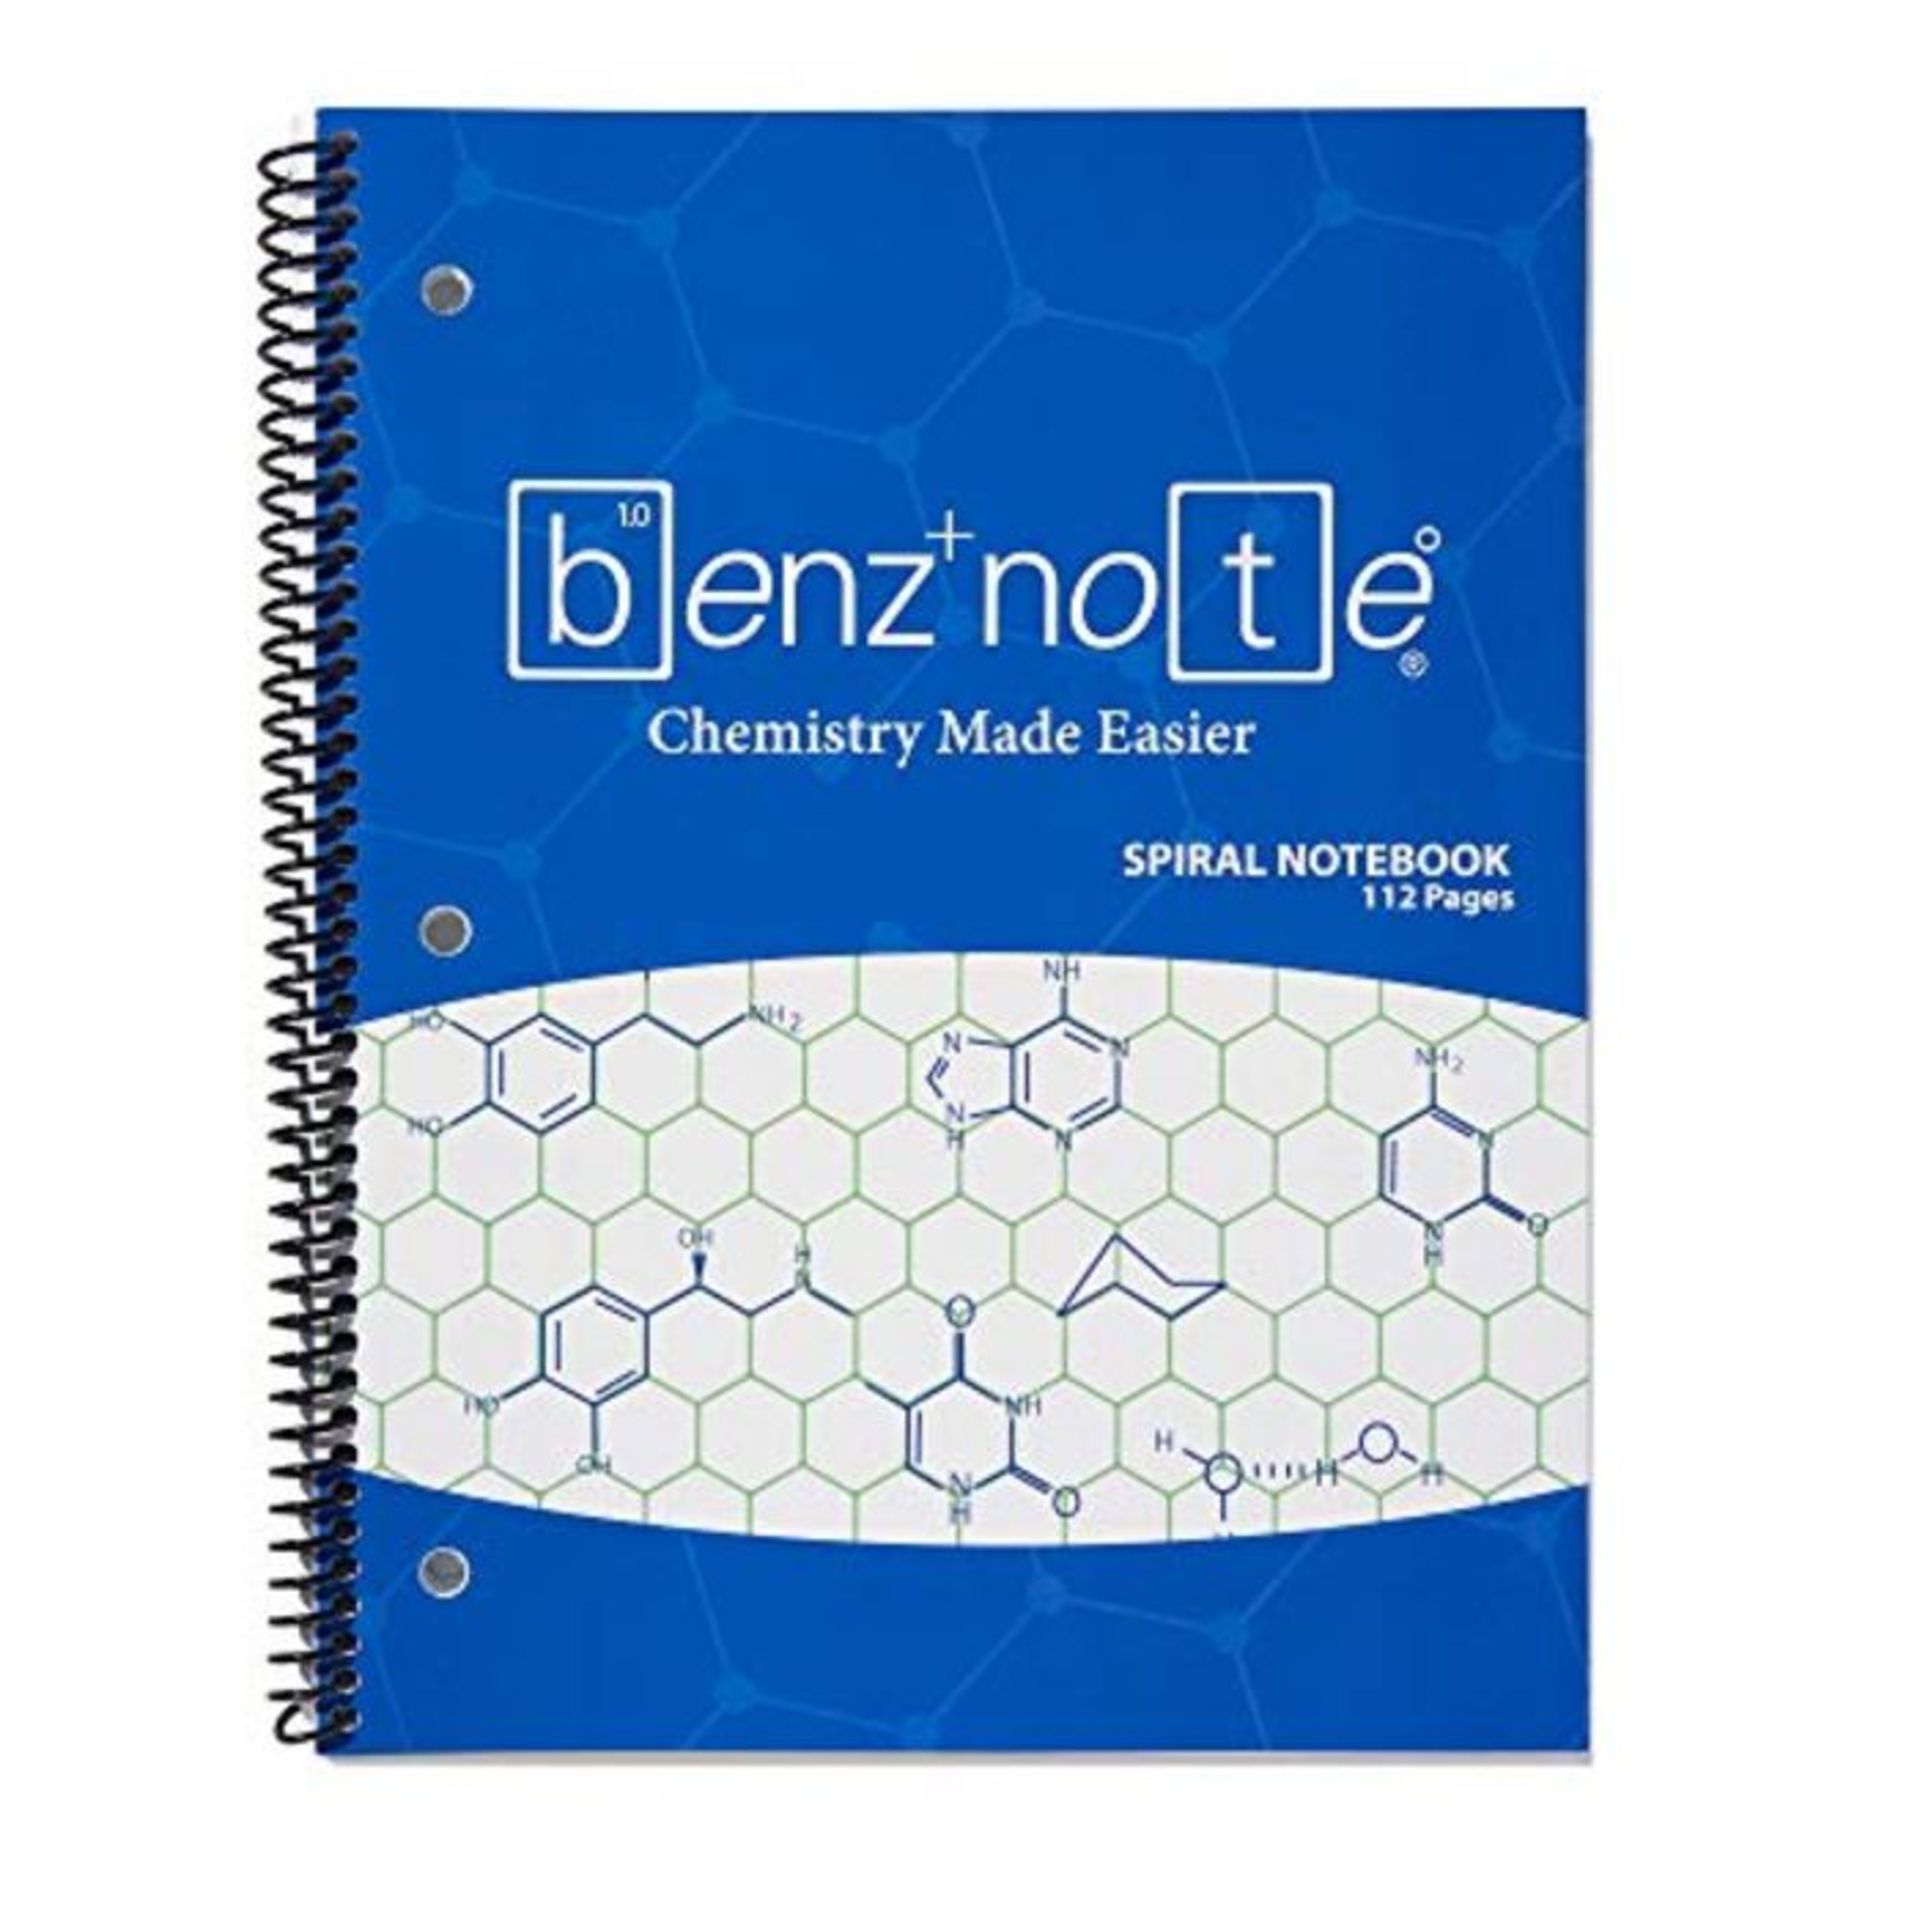 BENZNOTE, Spiral Notebook, for Organic and Bio Chemistry, 8-1/2" x 11", Hexagonal Grap